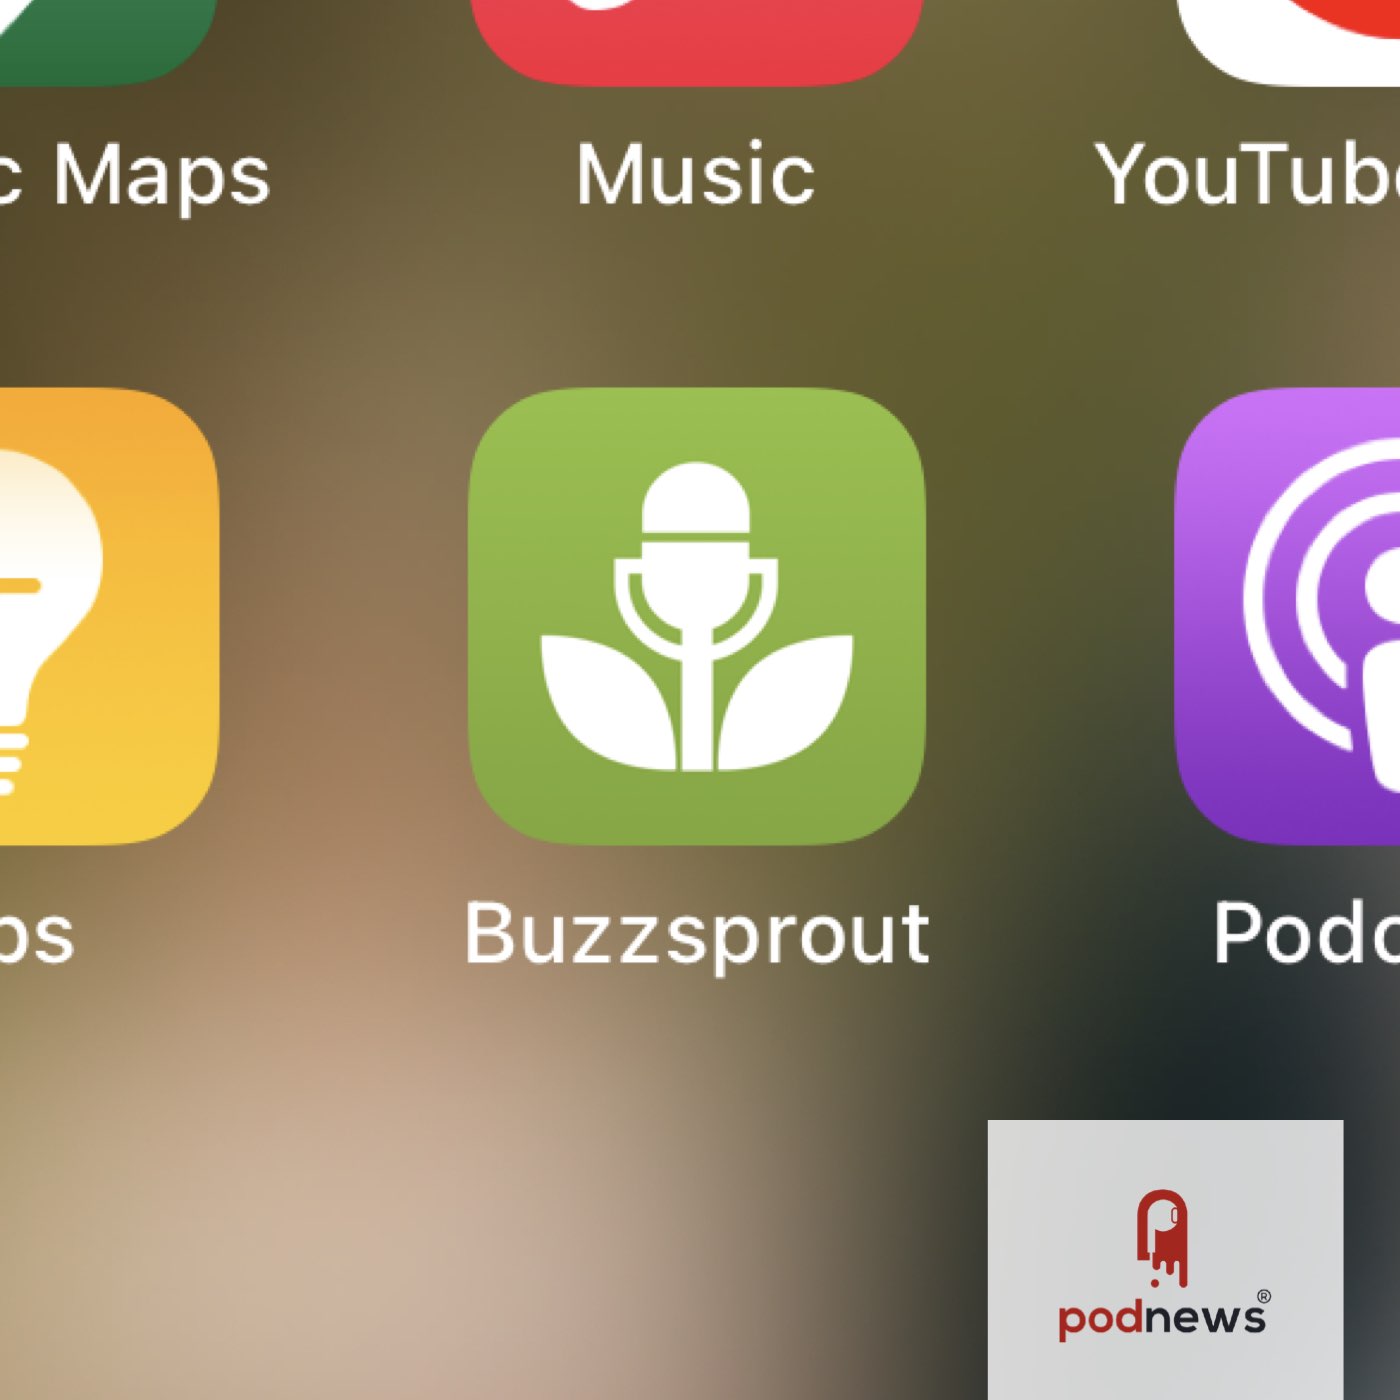 Buzzsprout launches an iOS app